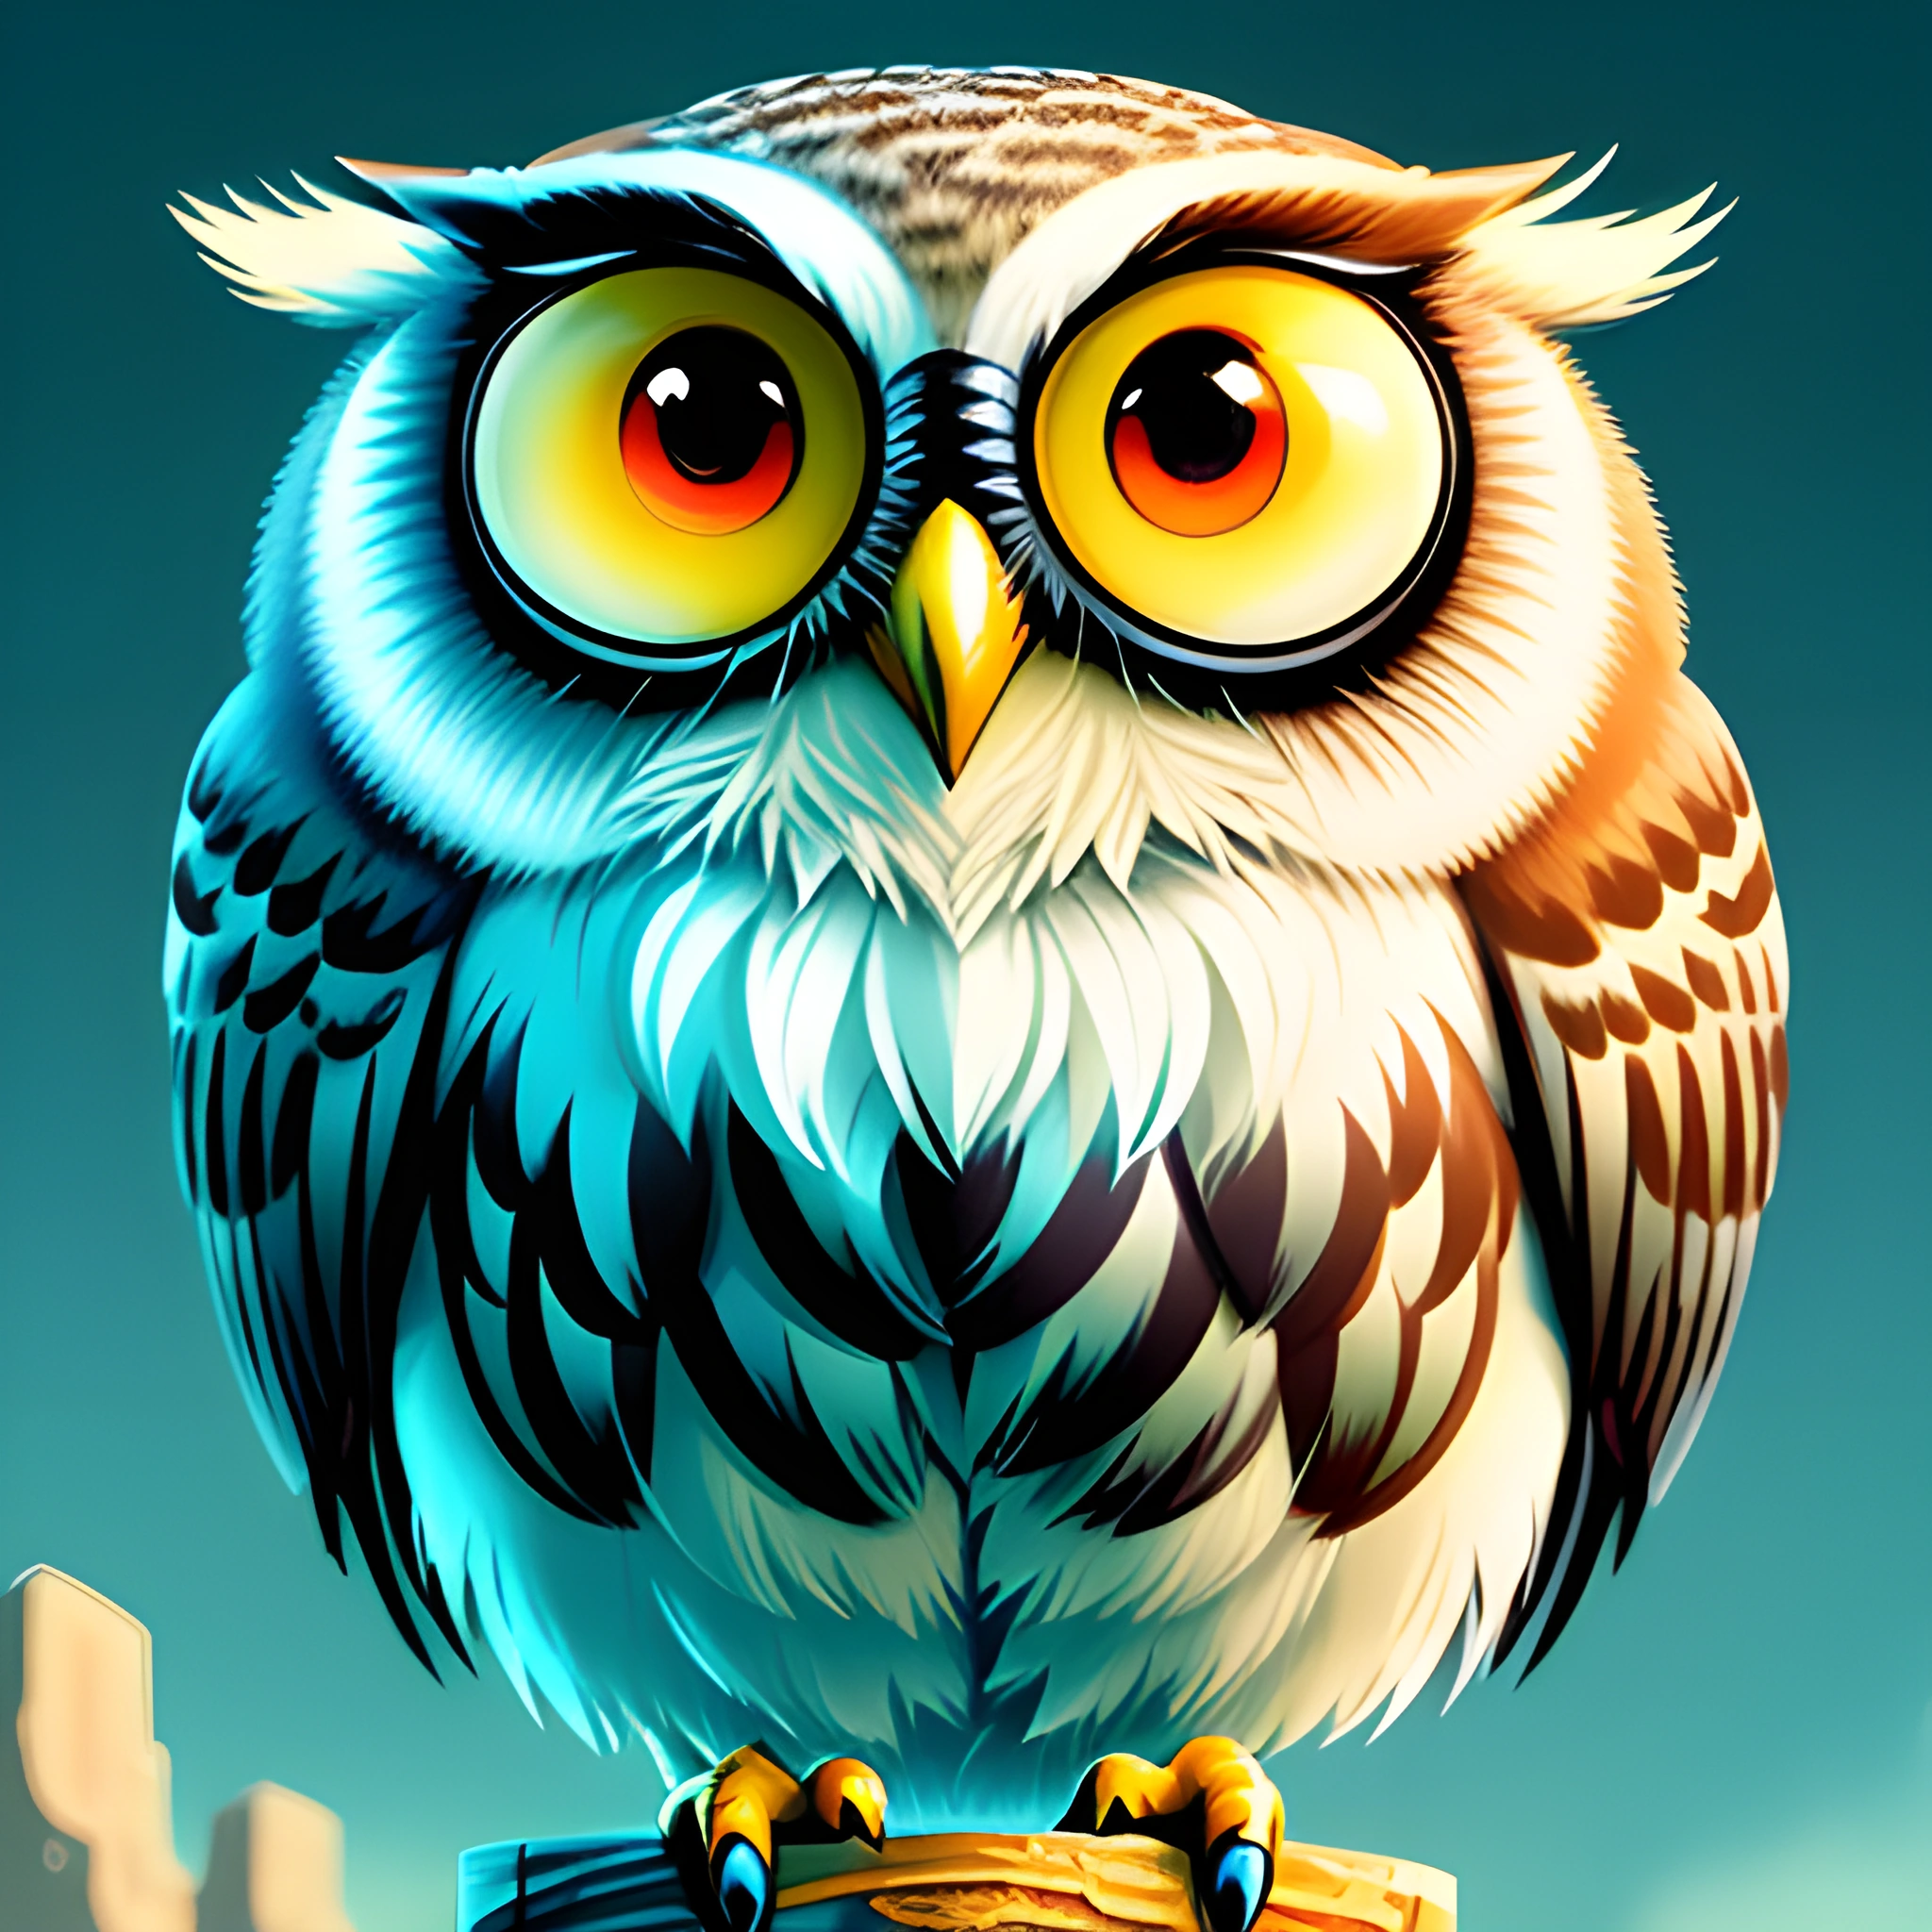 a cartoon owl sitting on a branch with a blue sky in the background